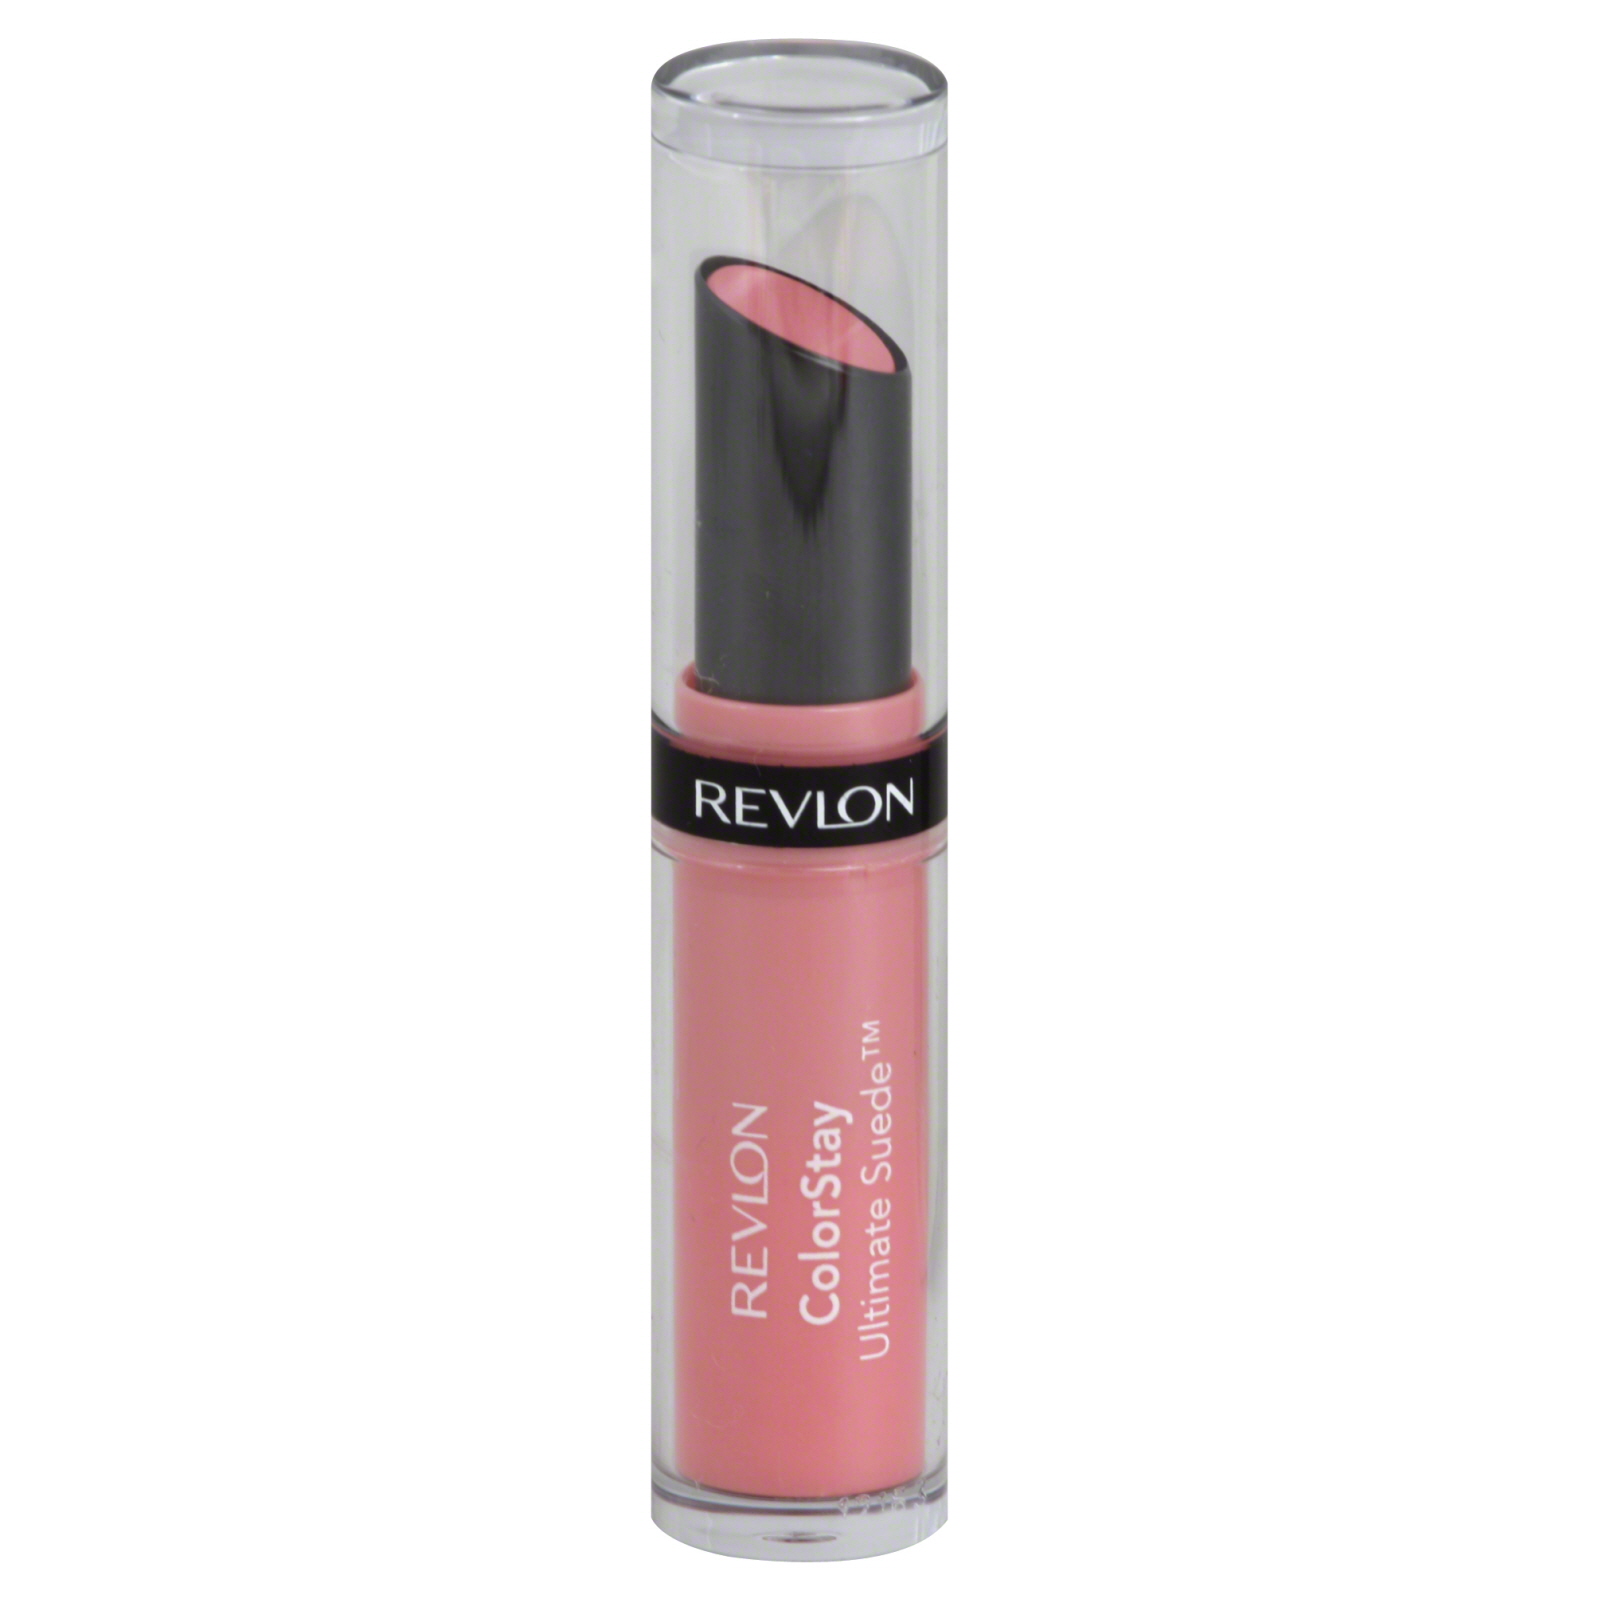 ColorStay Ultimate Suede Lipstick, High Heels 030, 0.09 oz (2.55 g)